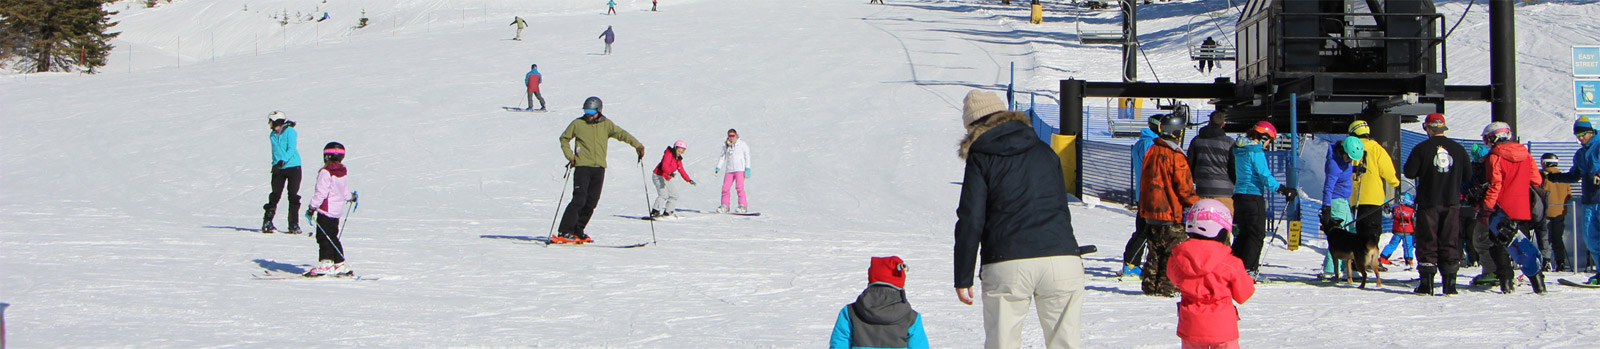 Kids learn to ski at the resort